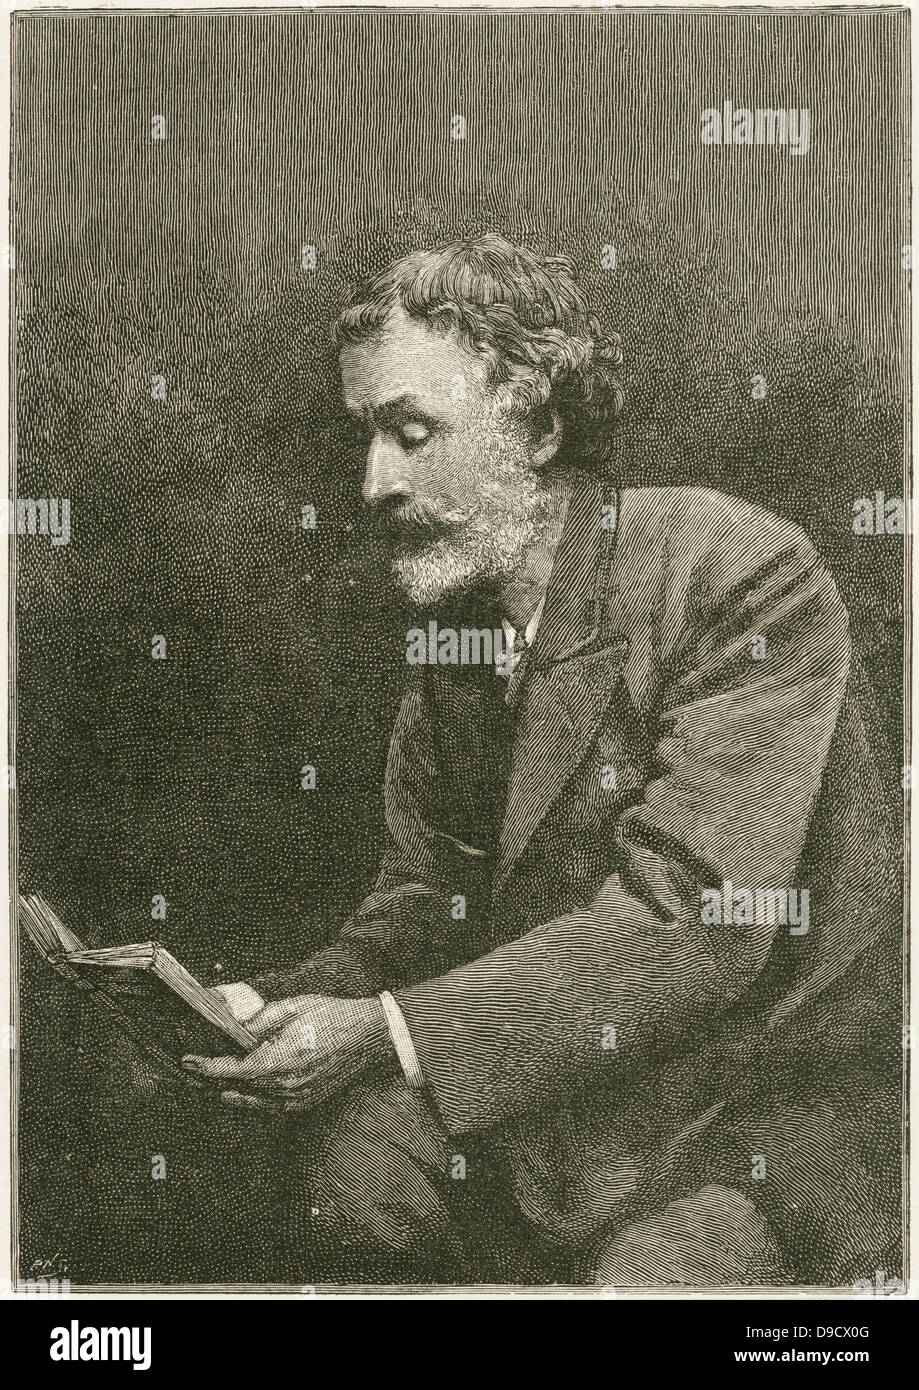 George Meredith. OM (1828-1909) English novelist, poet, and journalist of the Victorian era. Succeeded Tennyson as President of the Society of Authors: appointed to the Order of Merit in 1905.  Engraving. Stock Photo